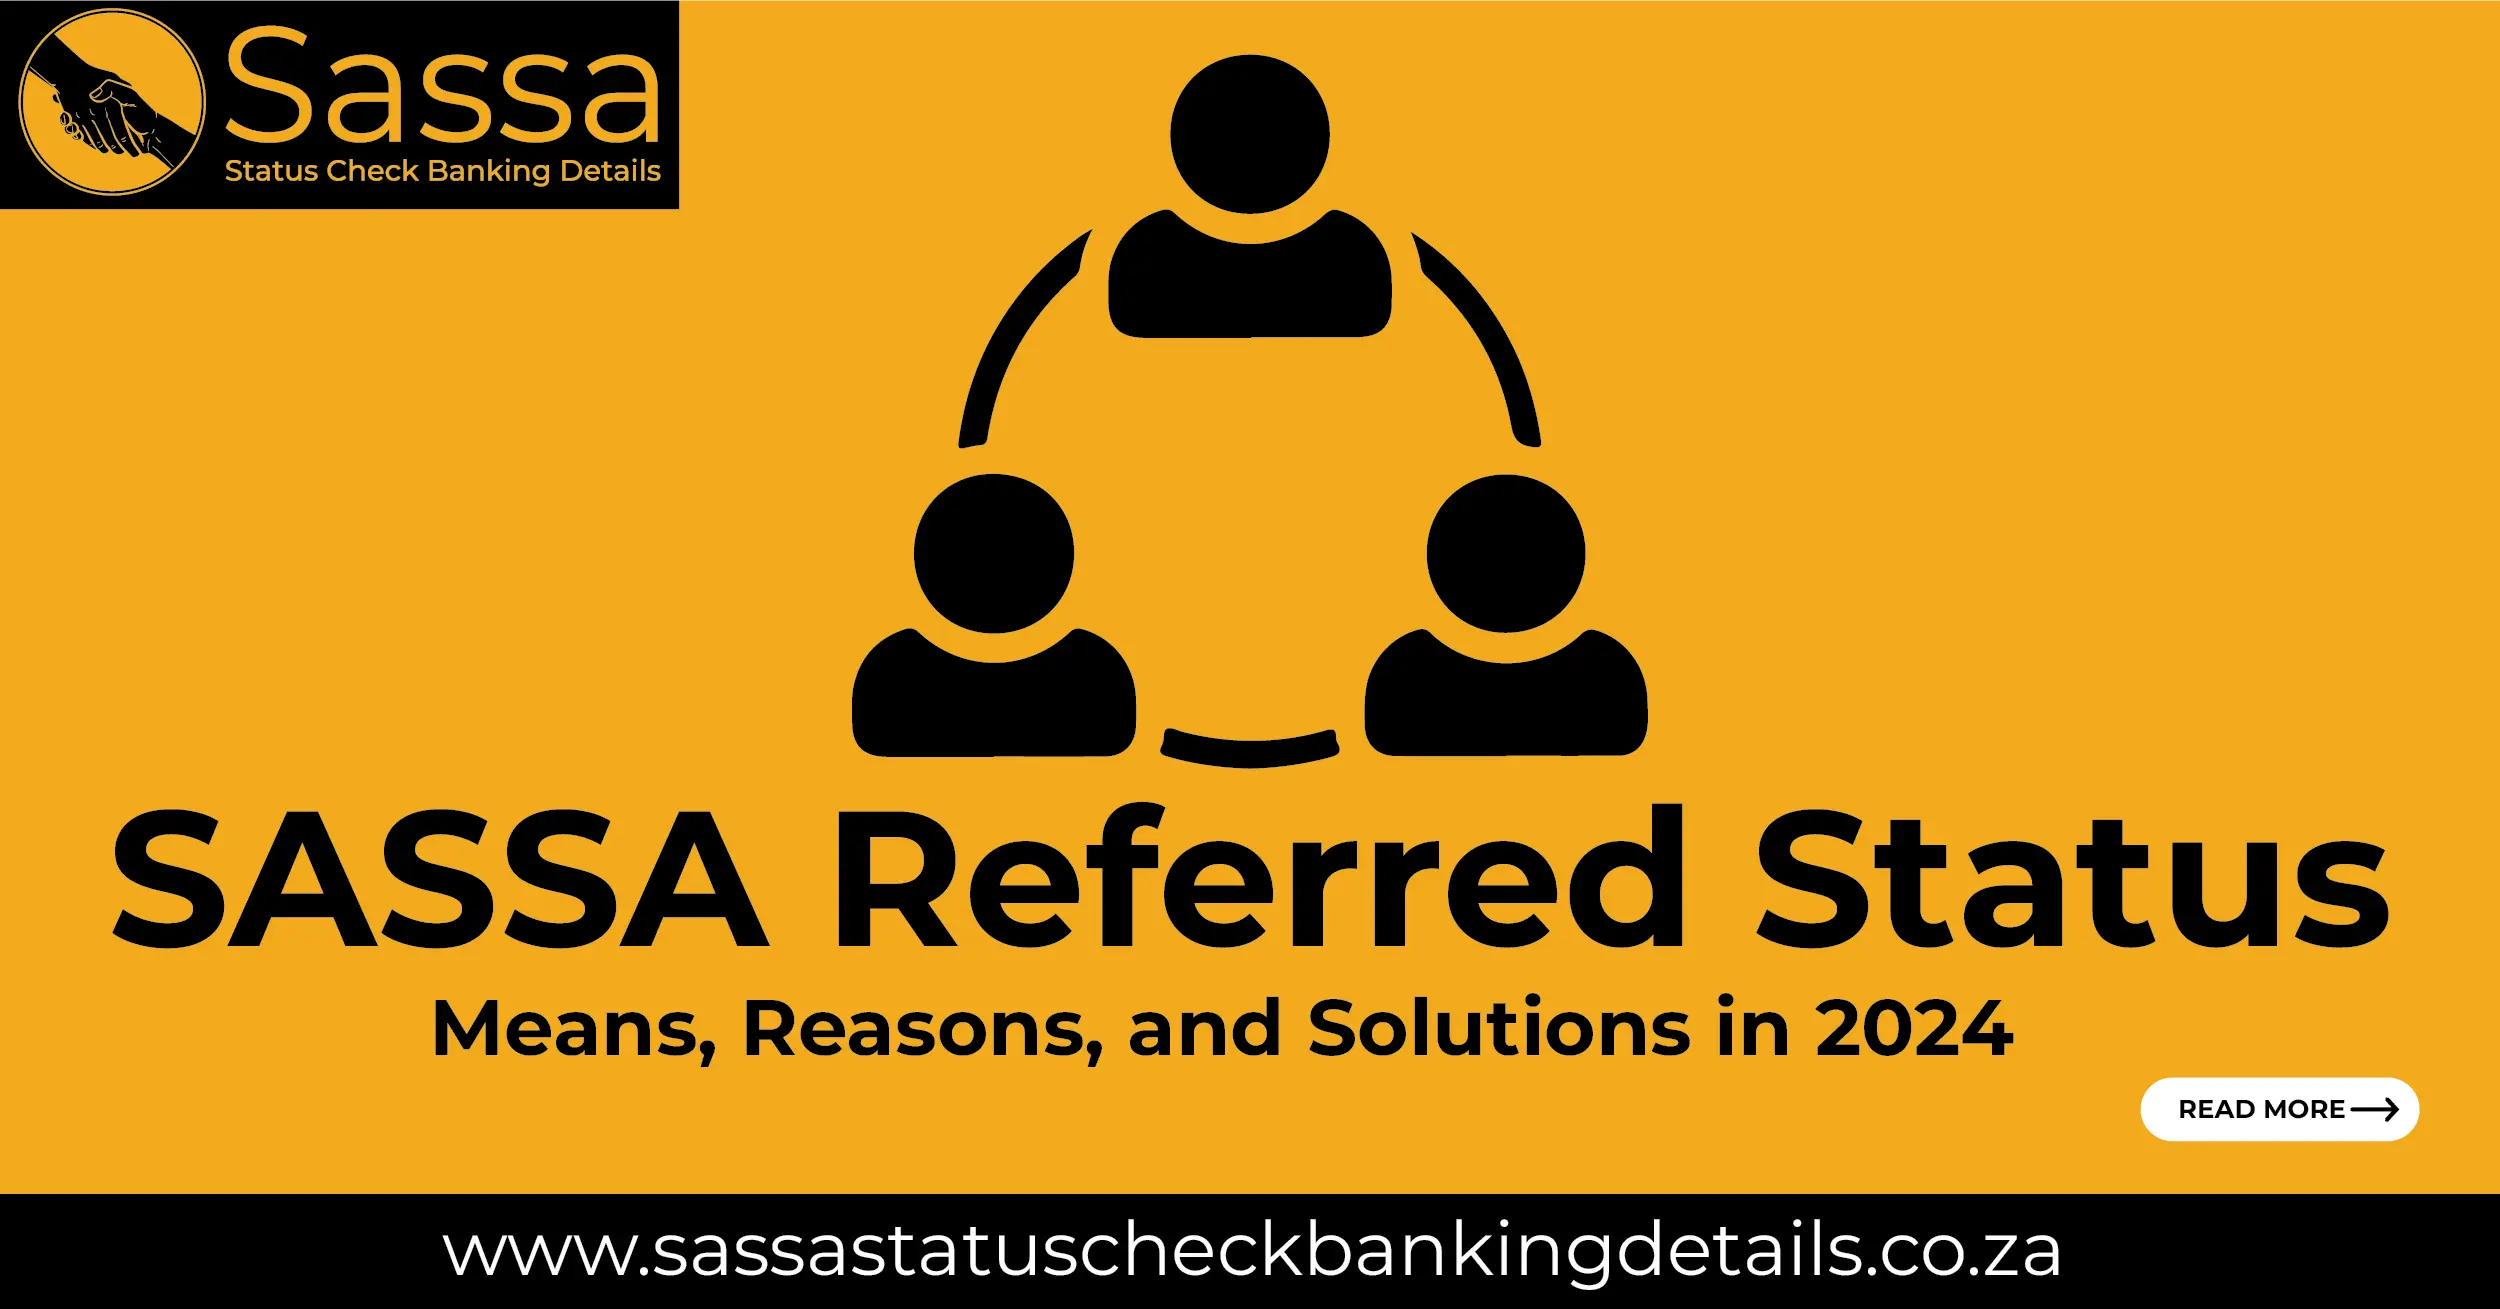 SASSA Referred Status | Means, Reasons, and Solutions in 2024